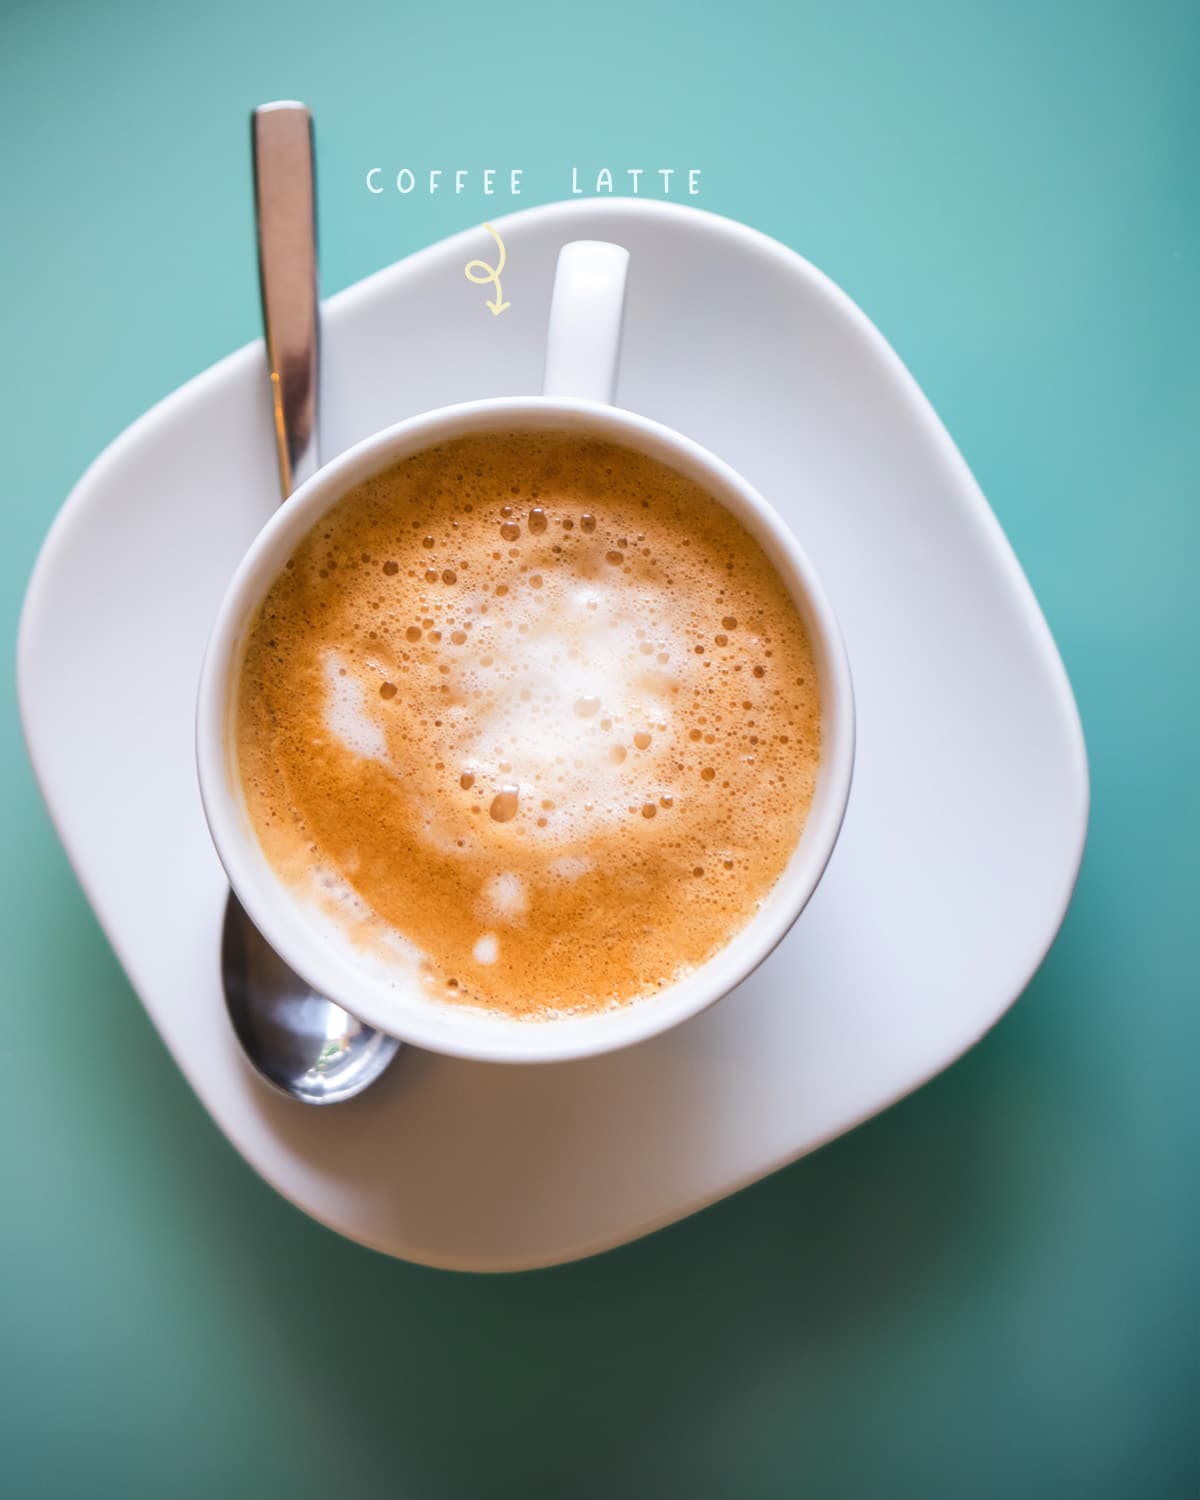 The ideal latte temperature is between 155° and 165° Fahrenheit. This temperature is hot enough to extract the flavors from the espresso beans, but it is not so hot that it will burn your mouth.